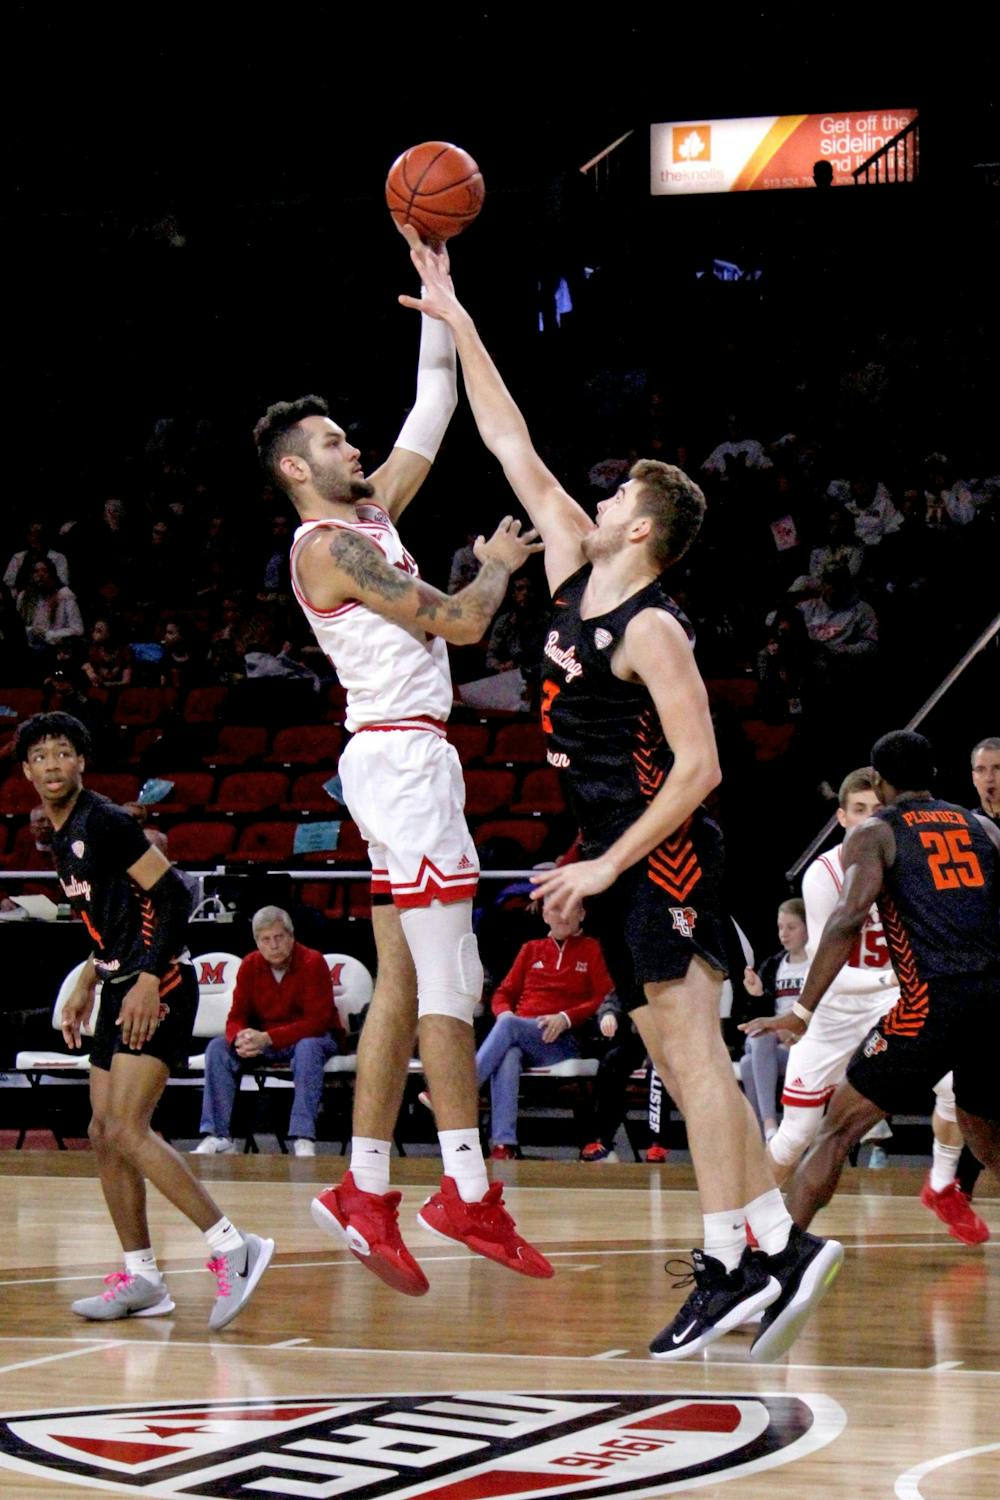 Miami sophomore forward Eli McNamara attempts a hook shot over a Bowling Green defender during a 73-55 RedHawk victory over the Falcons on Feb. 29 at Millett Hall.